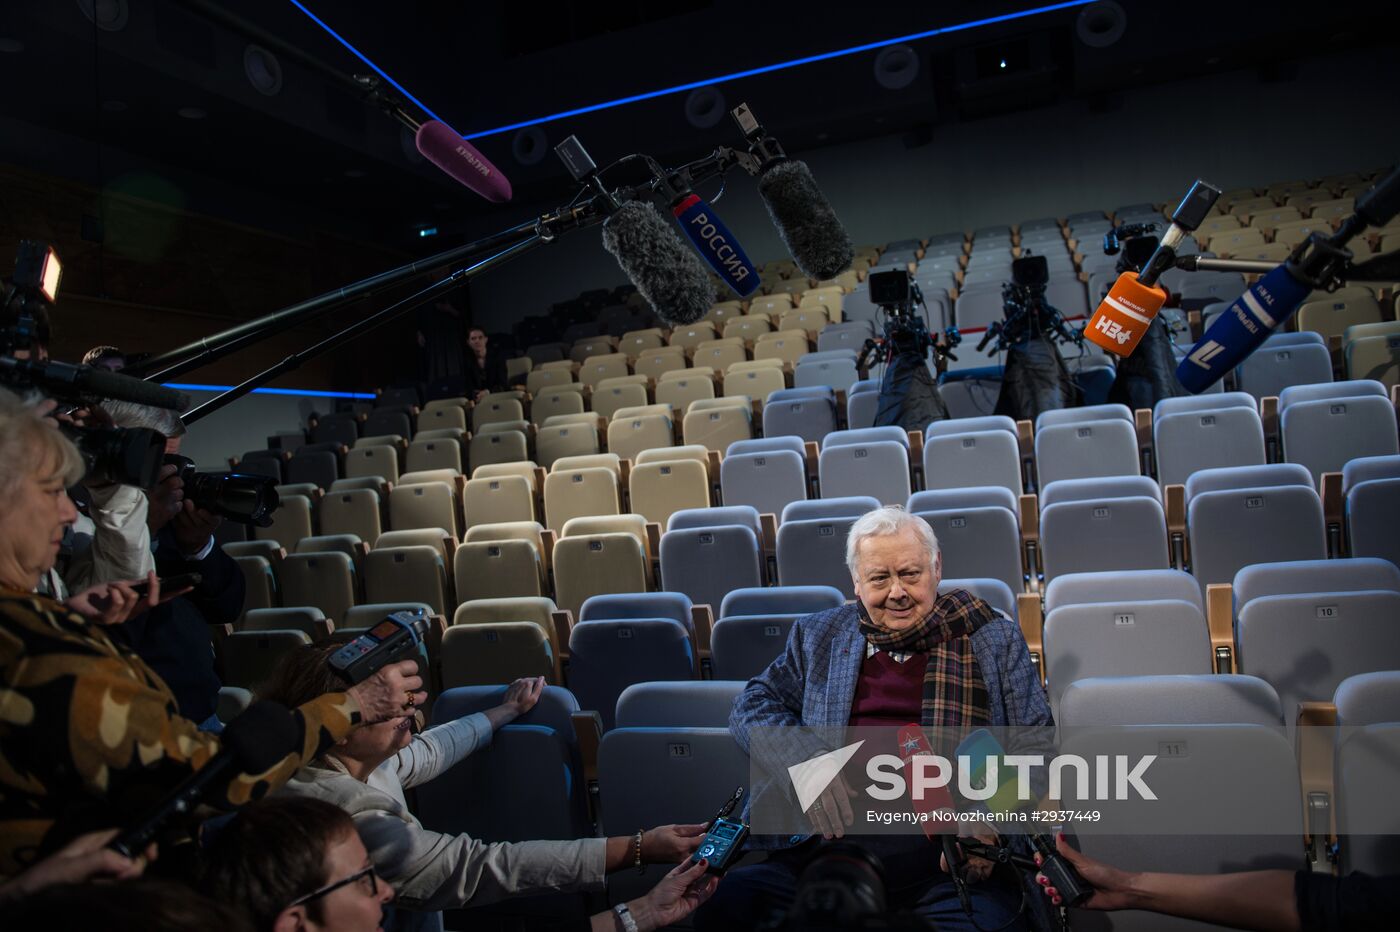 Opening of The Stage on Sukharevskaya, new stage of Oleg Tabakov's Moscow theater